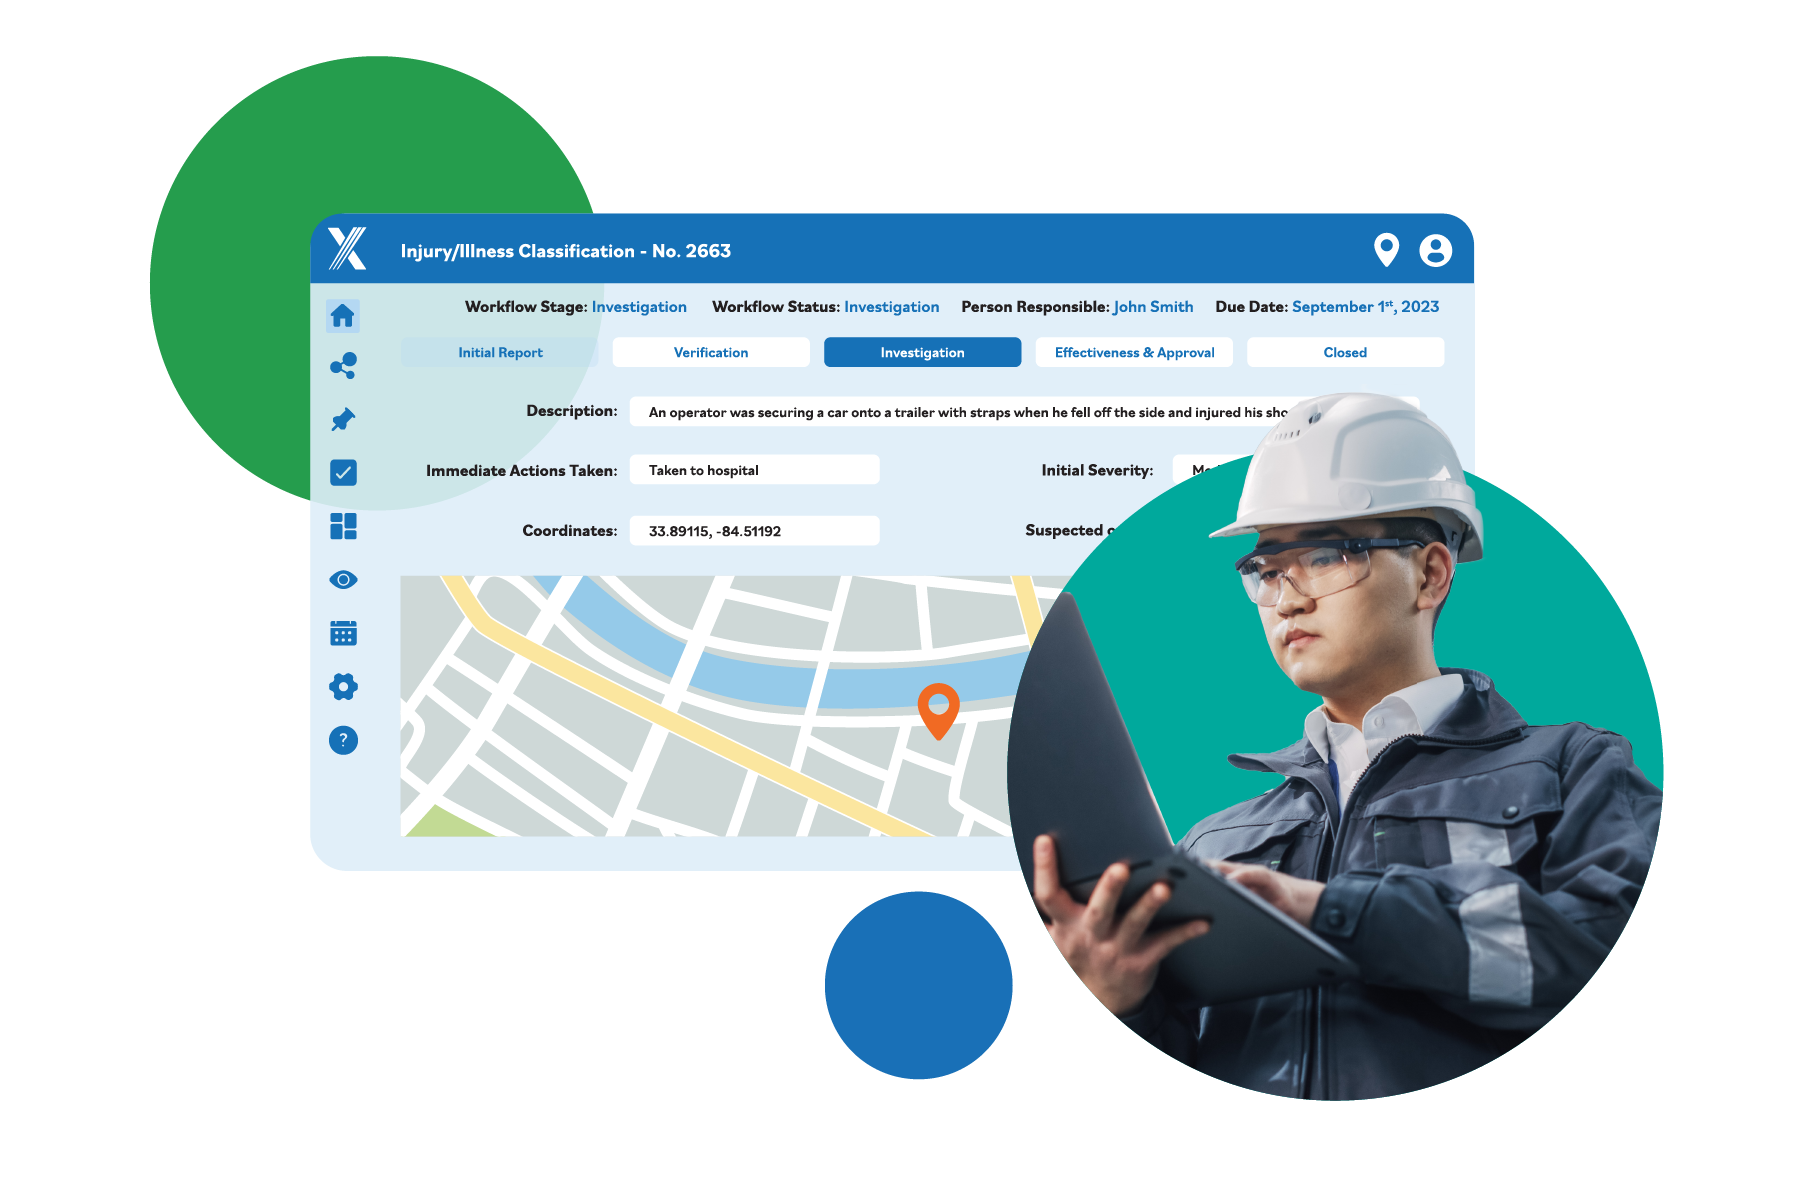 Capture, analyze and report on all safety incidents and near misses. The software includes forms for all types of incidents, such as injuries, environmental hazards, property damage, security breaches and more